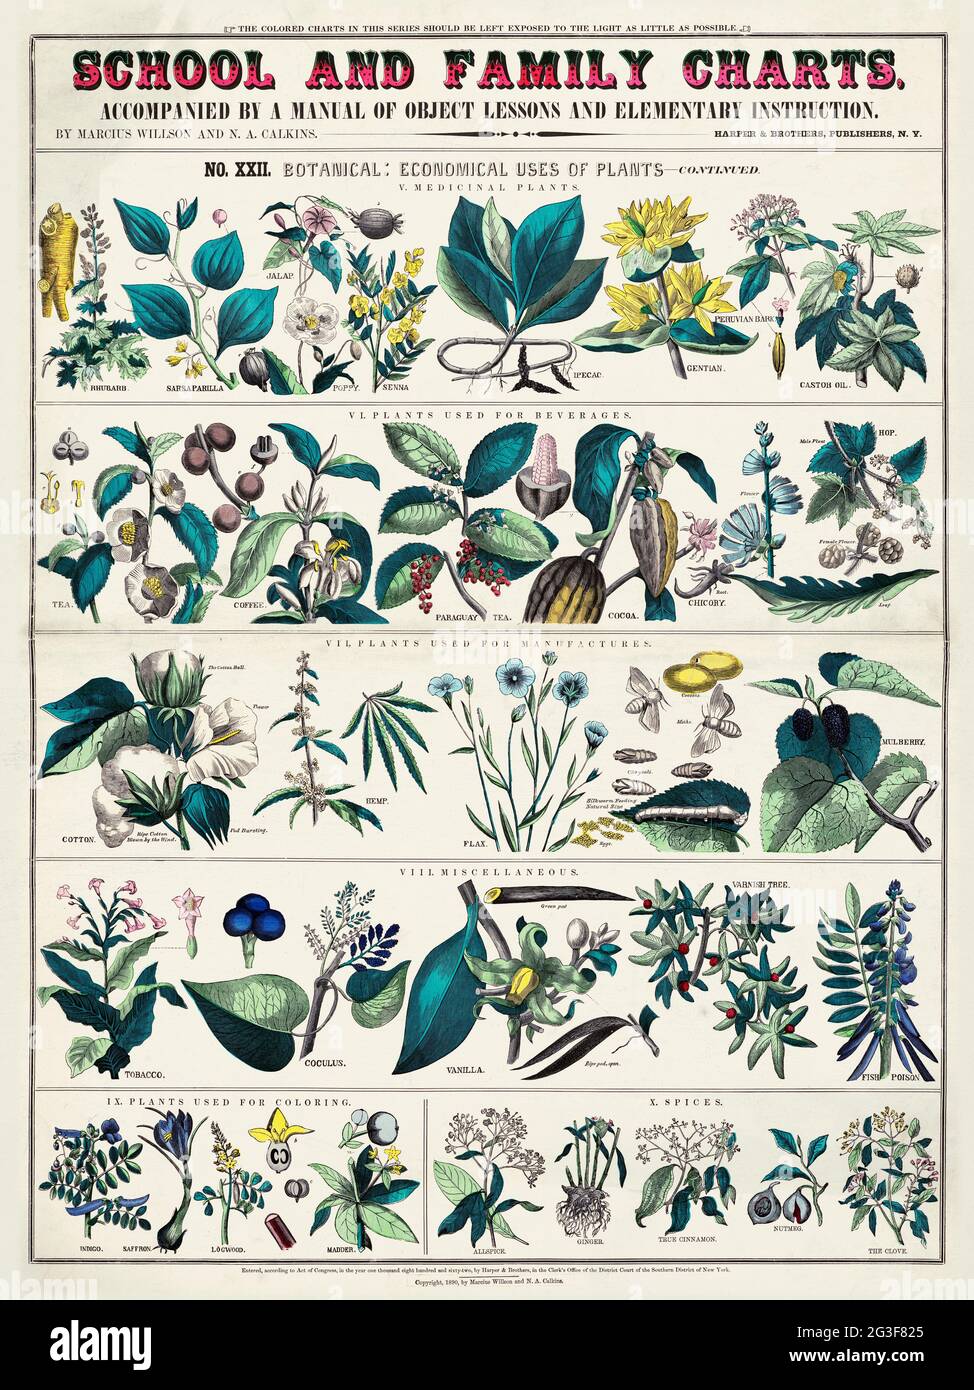 School and Family Charts.  Botanical: Economical uses of plants. Vintage poster. Stock Photo